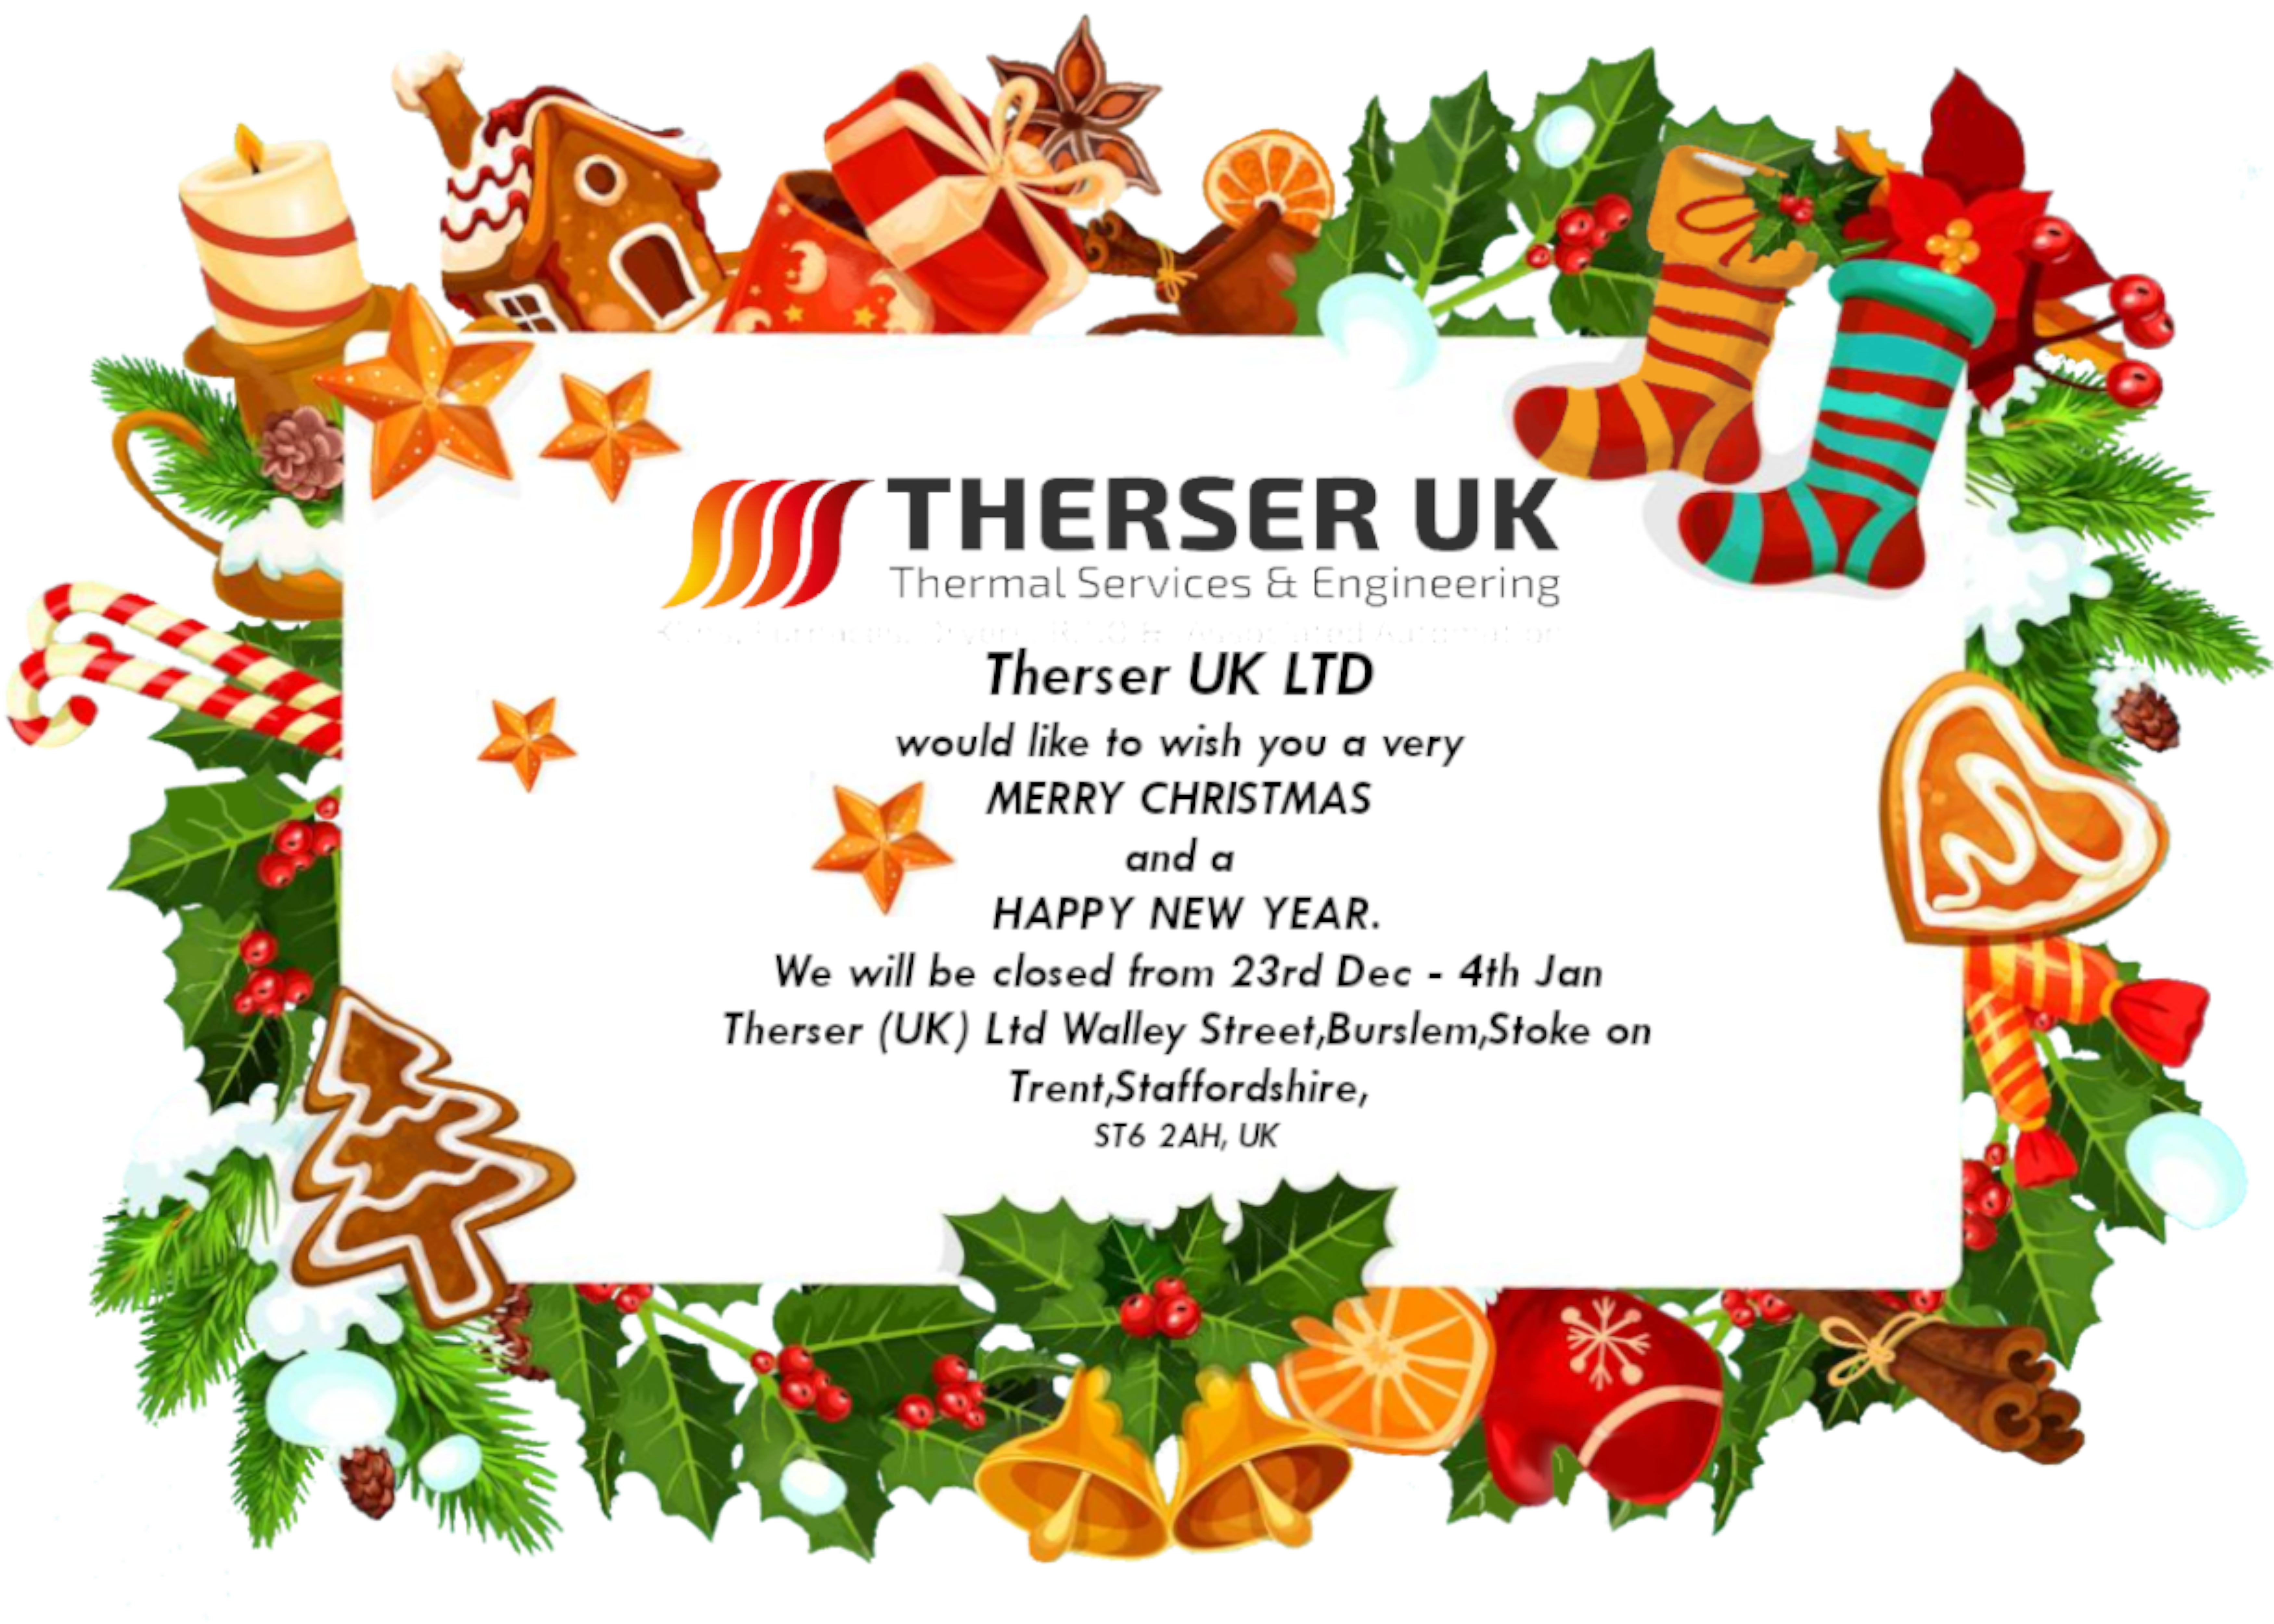 Merry Christmas From Therser UK